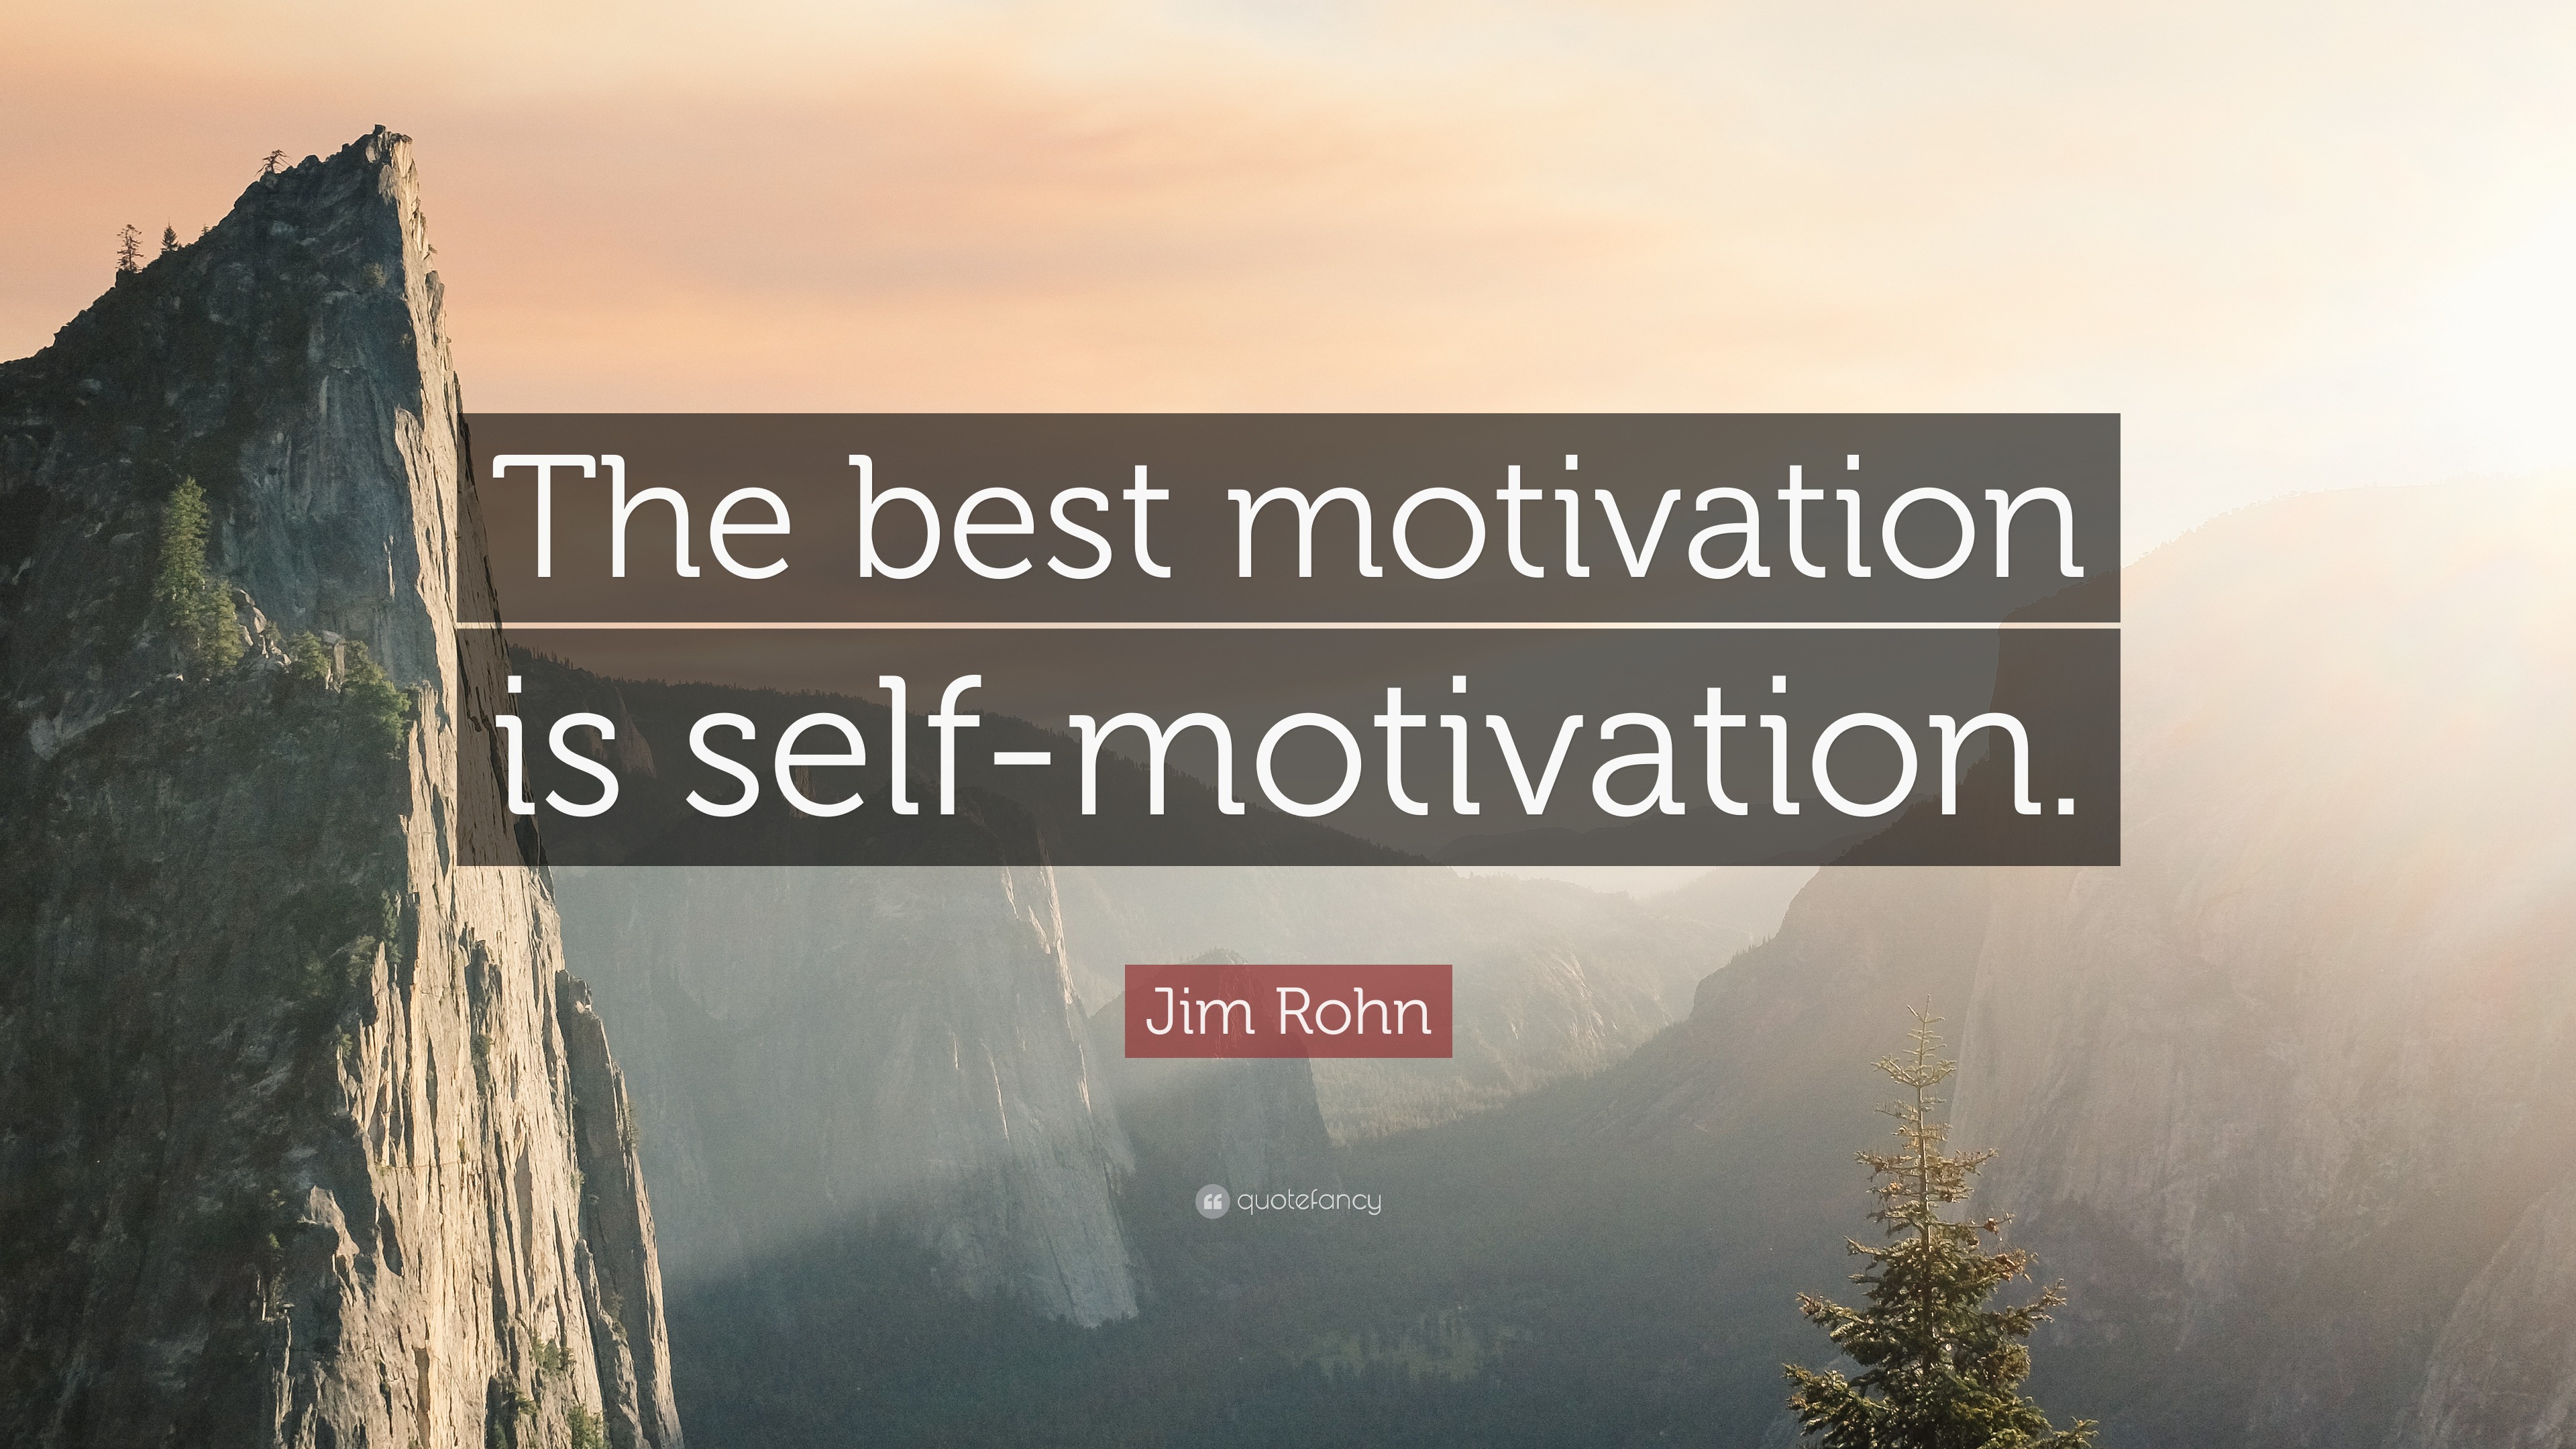 Jim Rohn Quote “The best motivation is selfmotivation